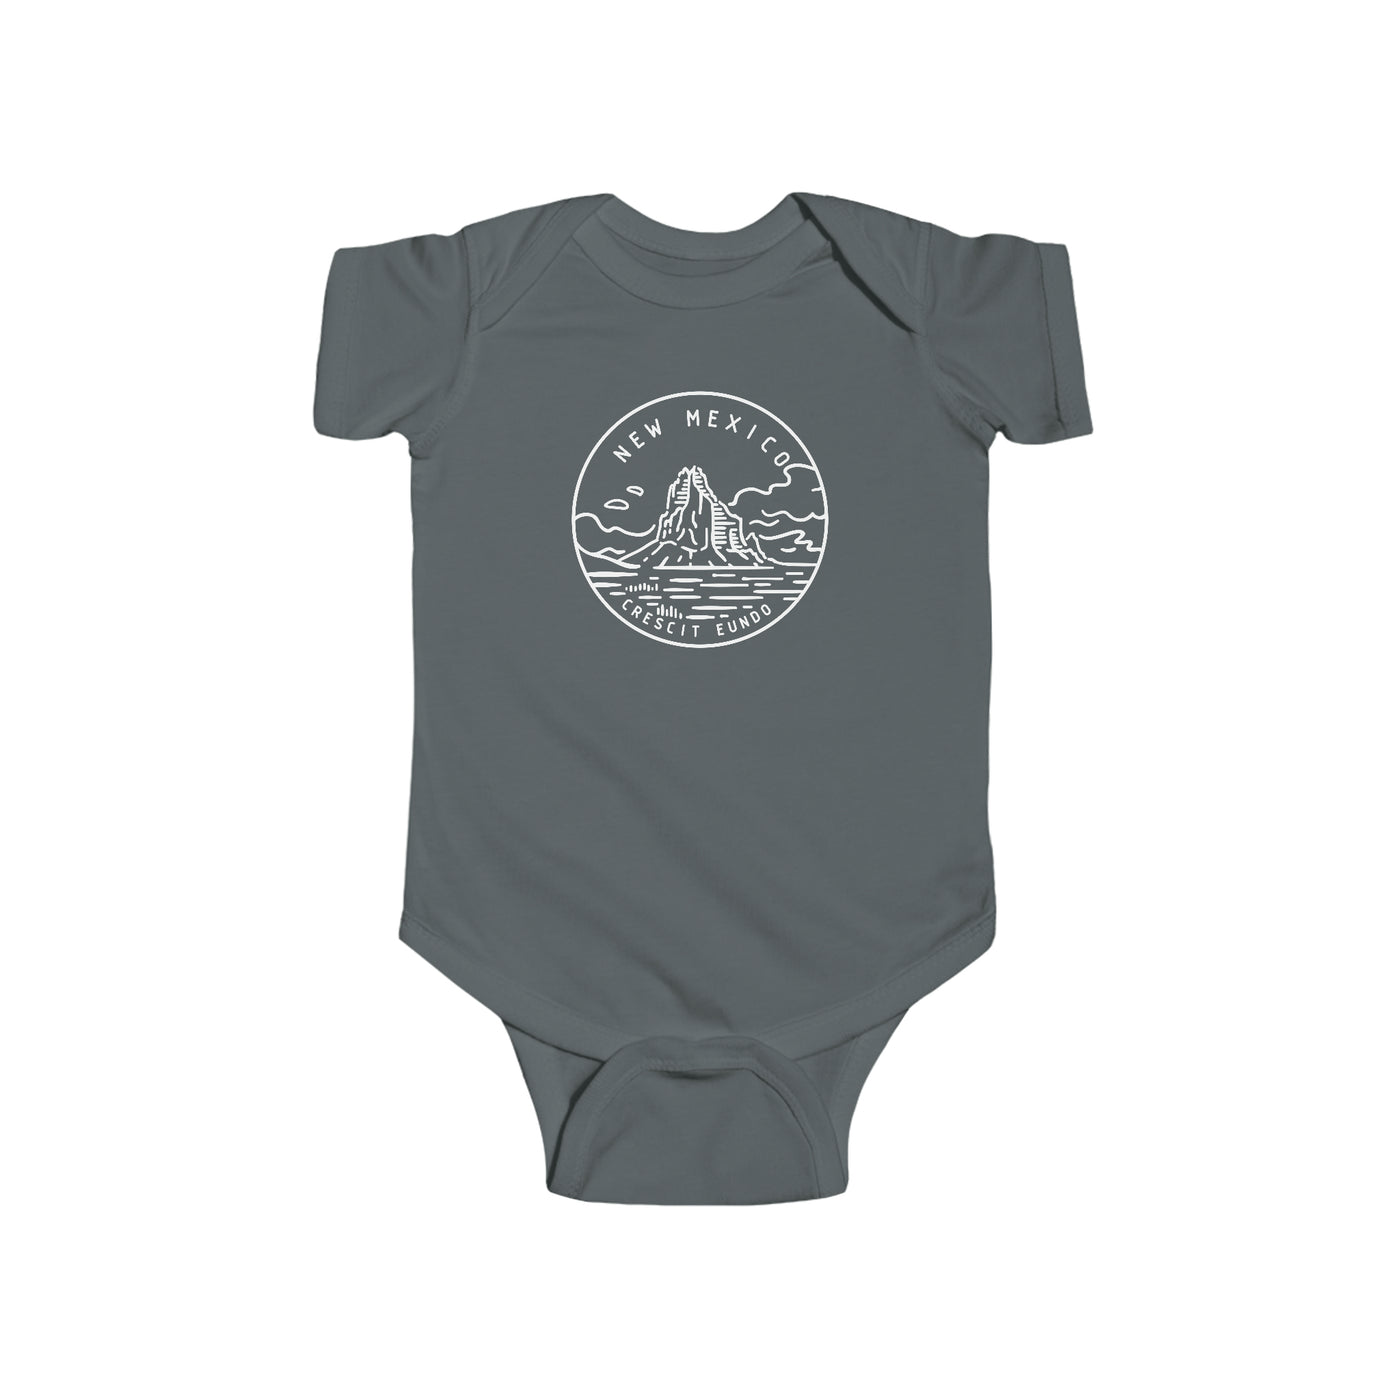 New Mexico State Motto Baby Bodysuit